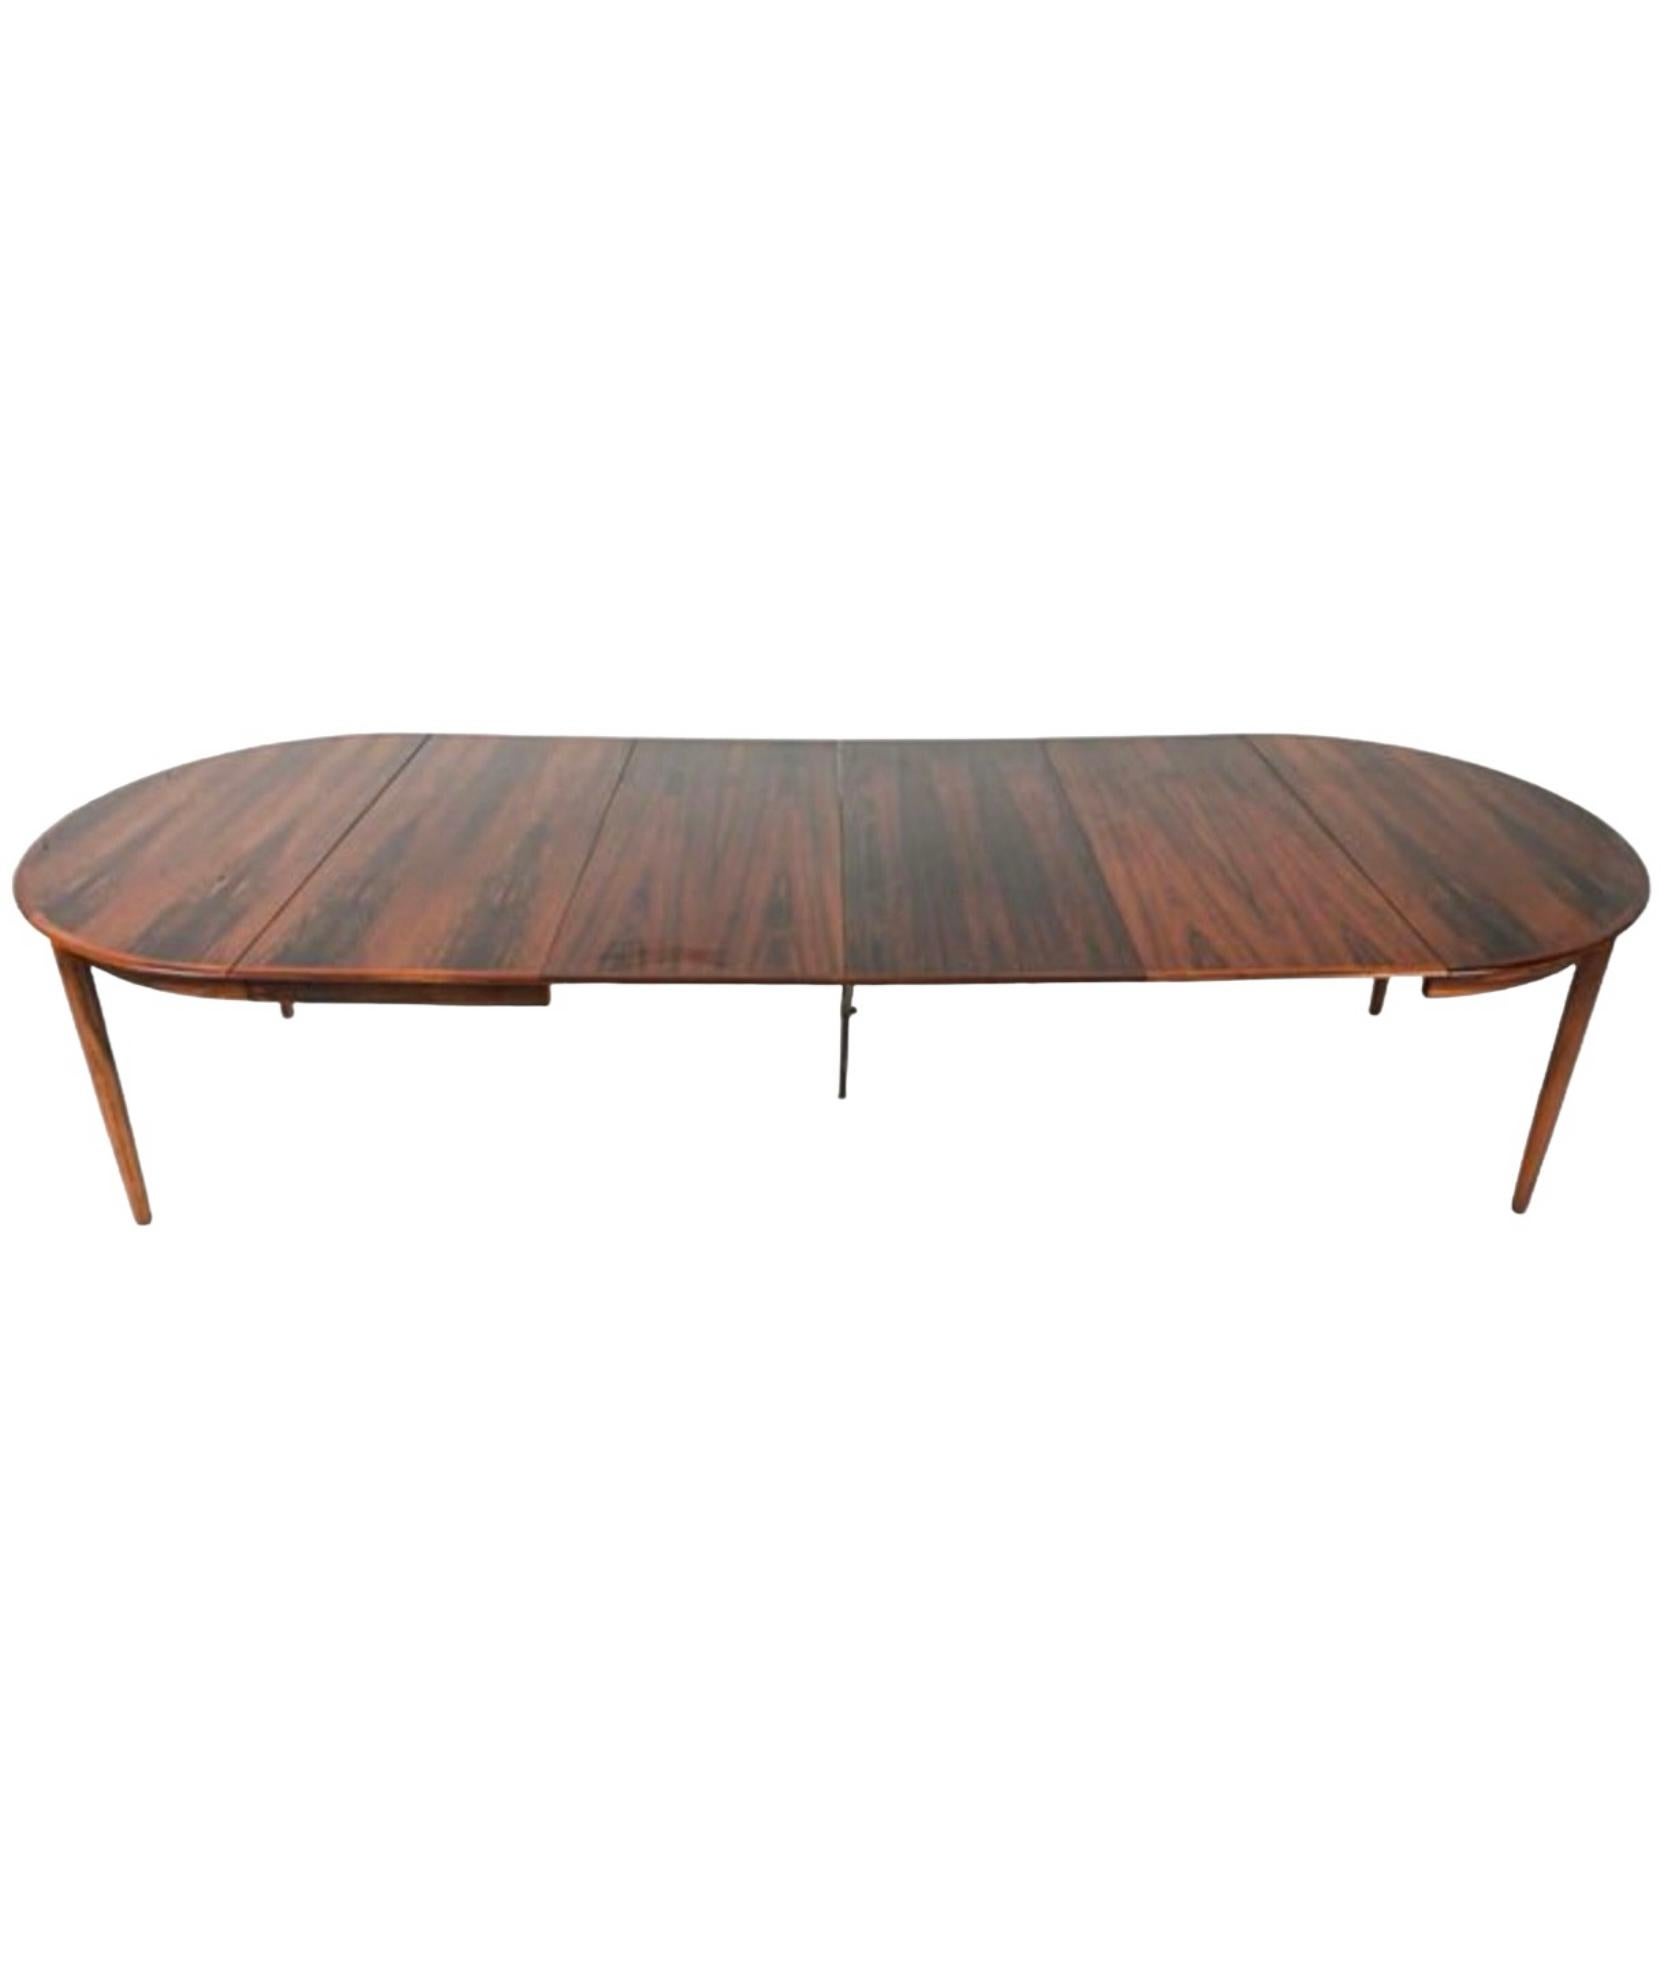 This is a round Danish modern round rosewood dining table in the manner of Arne Vodder. The table has 4 twenty inch leaves, which is highly unusual. It is marked with the Denmark stamp. It is in very good condition.

My shipping is for the